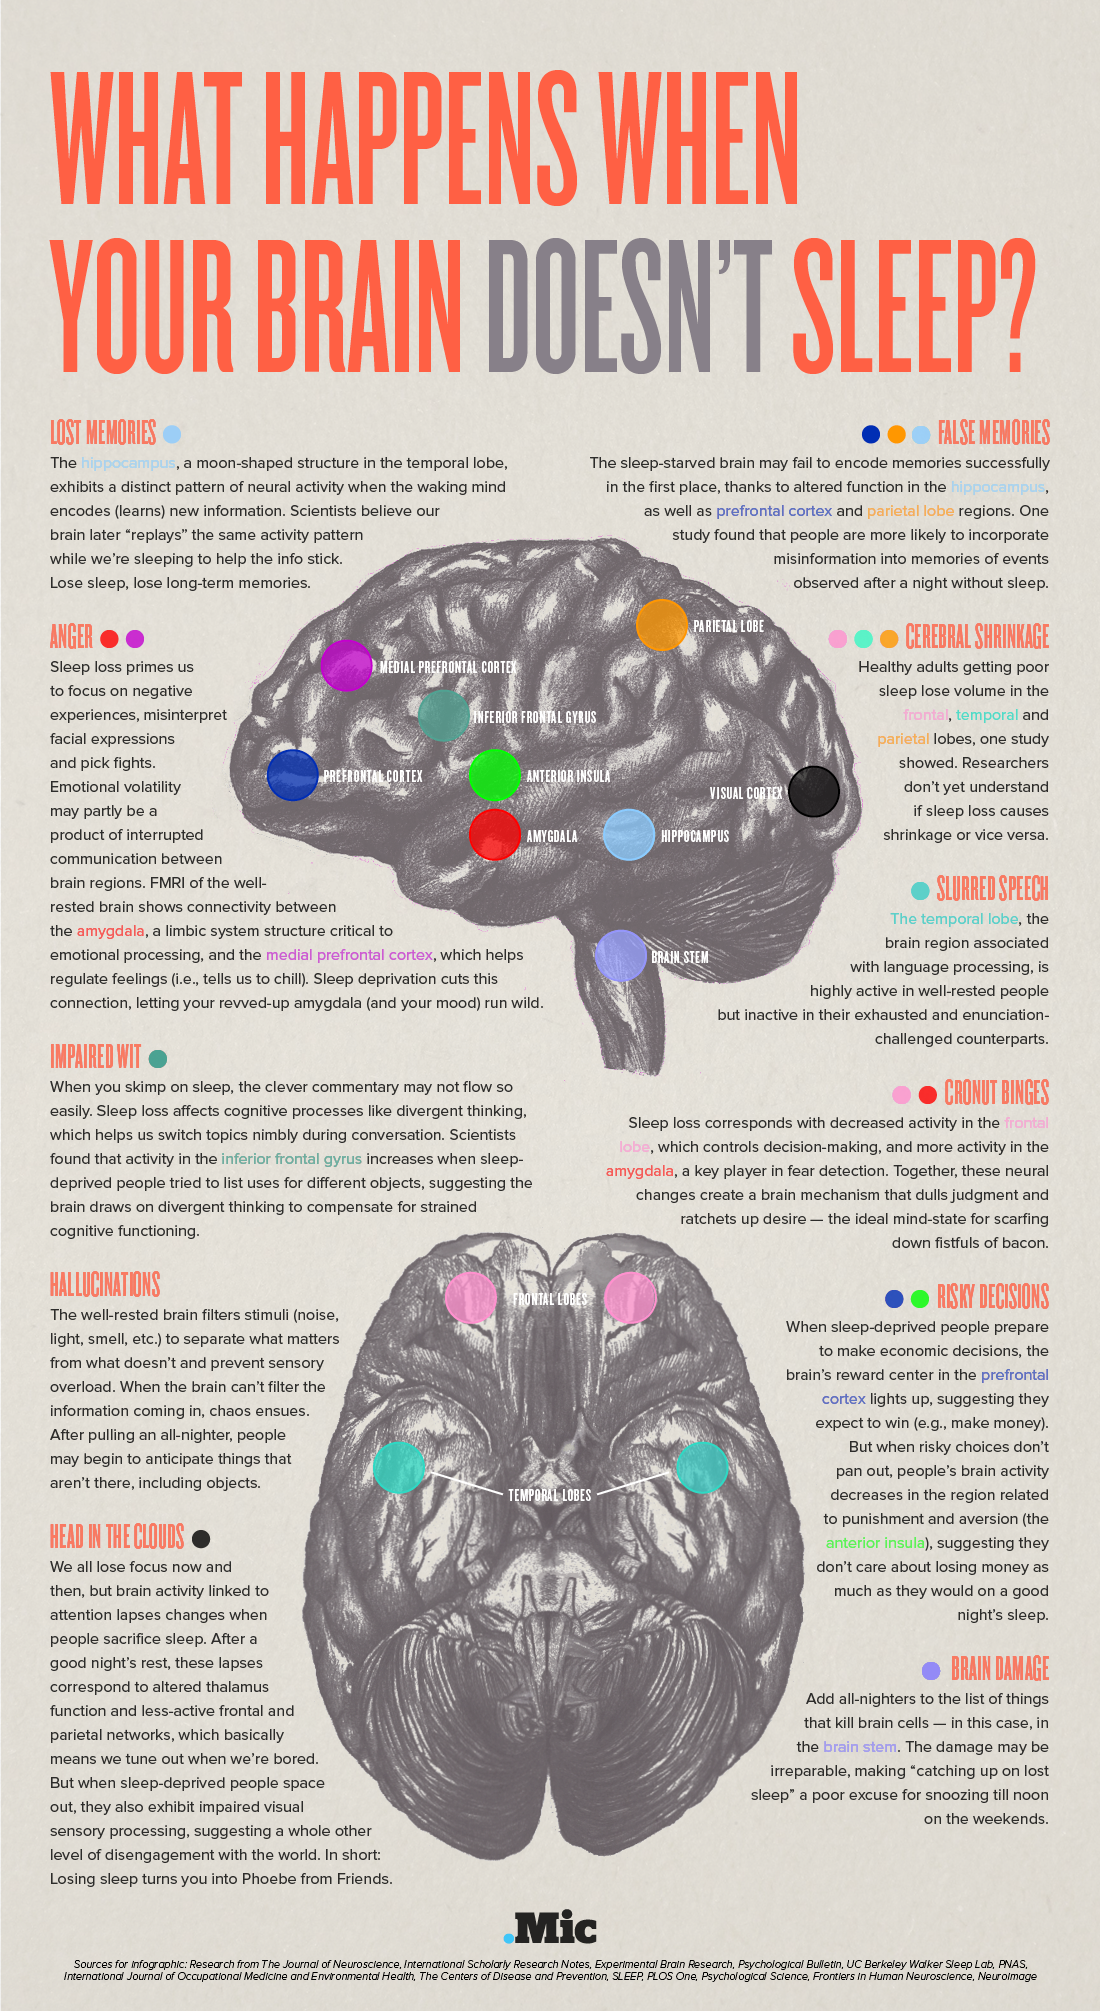 Entrepreneur | This Is Your Brain on Not Enough Sleep (Infographic)